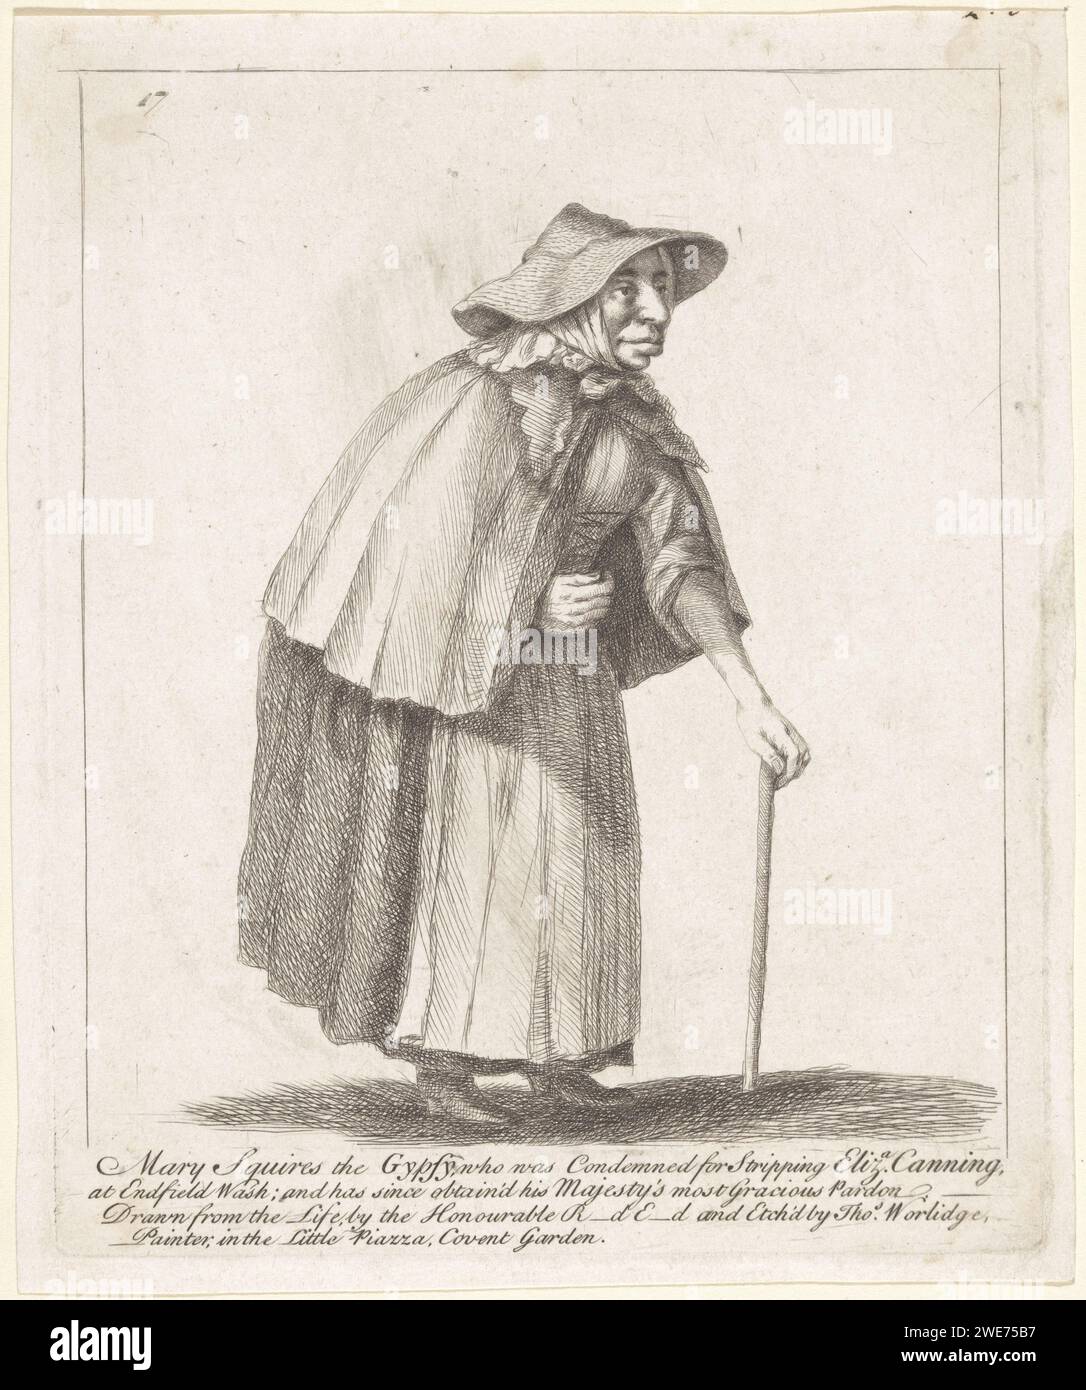 Portret van Mary Squires, Thomas Worlidge, after Richard Edgcumbe (2e Baron Edgcumbe), 1753 - 1755 print   paper etching / drypoint historical person (with NAME) - BB - woman - historical person (with NAME) portrayed alone Stock Photo